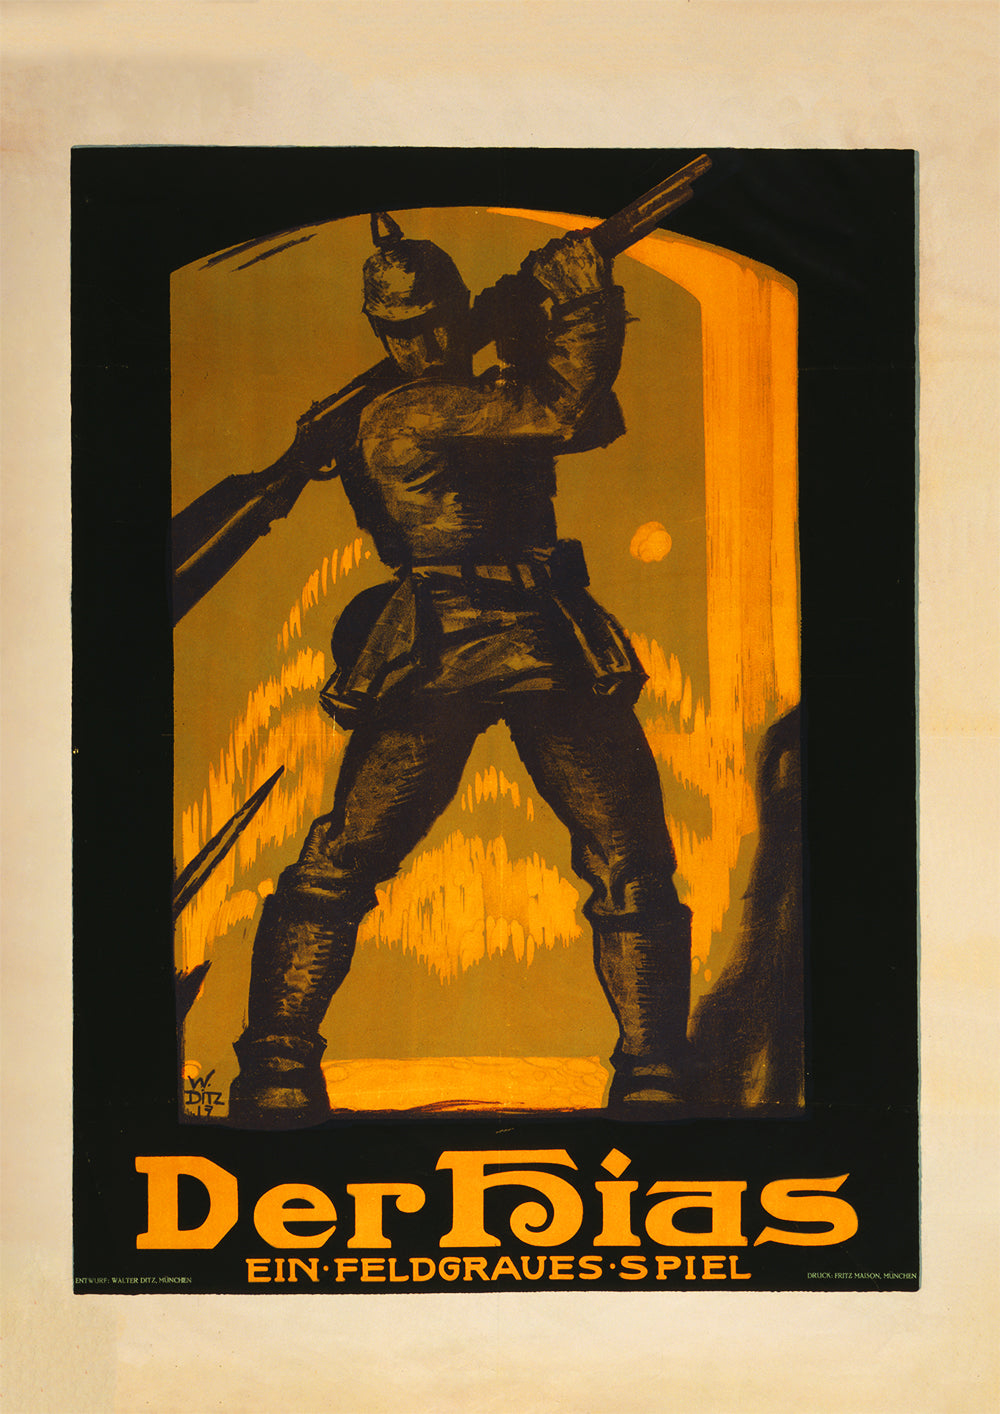 A play about soldiers – German World War One poster